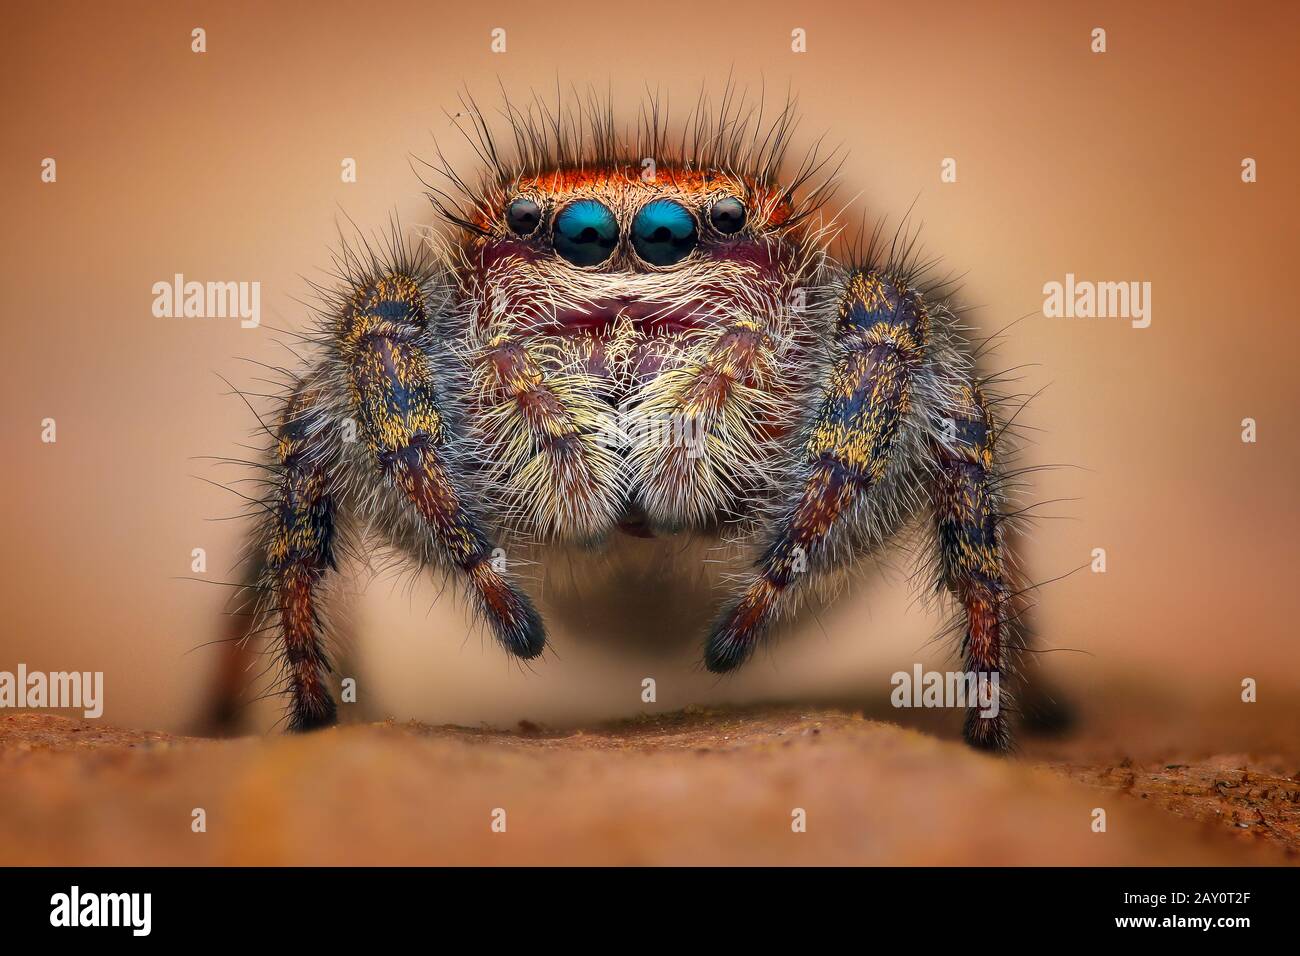 Close-up of a thomisidae, Indonésie Banque D'Images